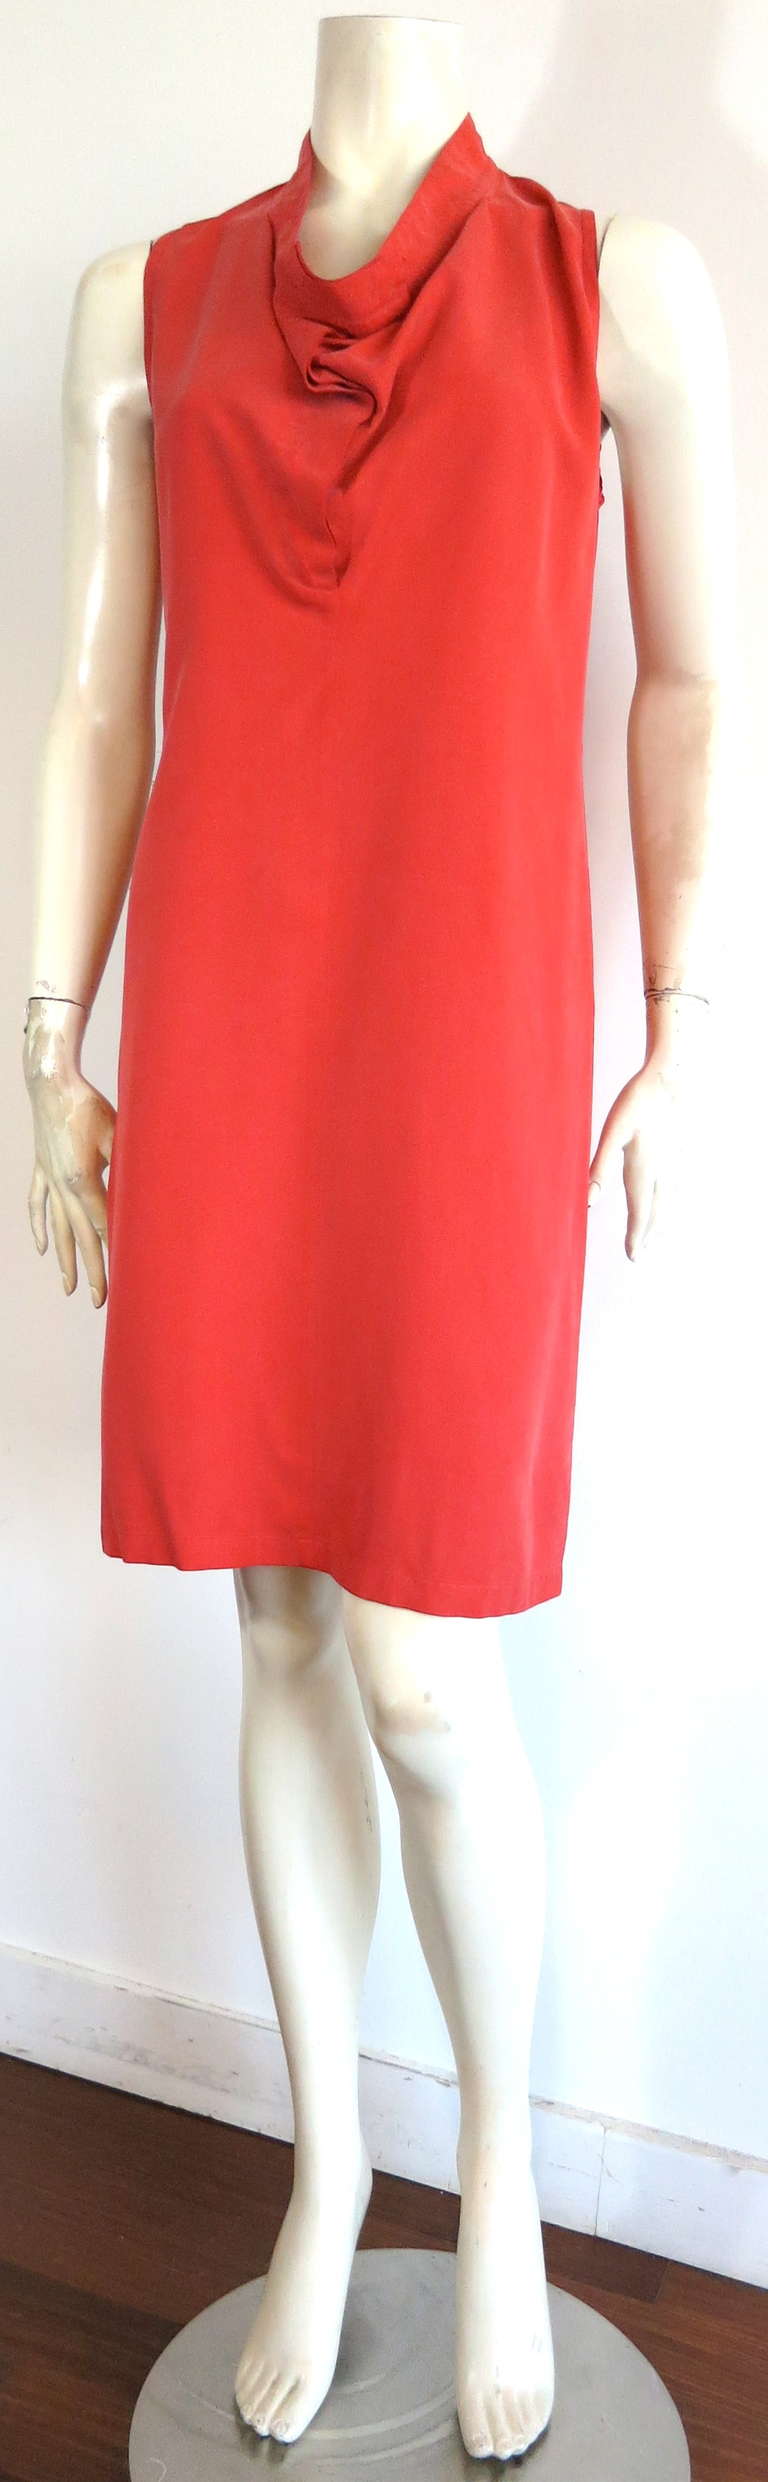 1990's ANN DEMEULEMEESTER washed, coral color silk day dress.

The dress was designed by Ann Demeulemeester in the 1990's, and was made in Belgium, as labeled.

The dress features a wonderful neckline inspired by the construction of a trouser